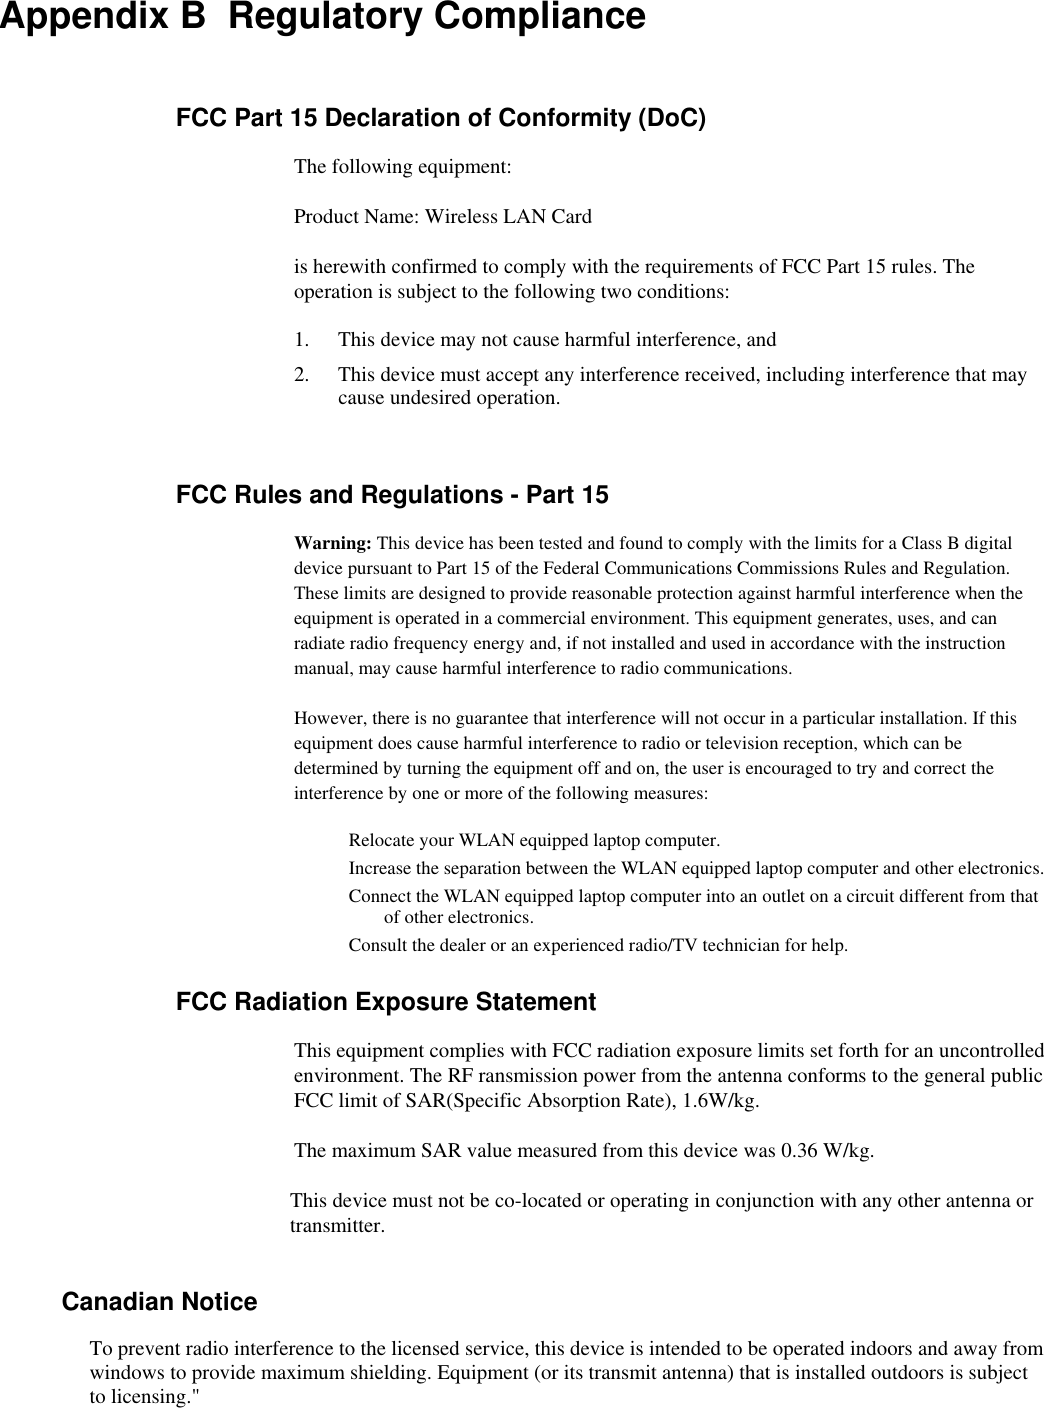 Appendix B  Regulatory Compliance FCC Part 15 Declaration of Conformity (DoC) The following equipment: Product Name: Wireless LAN Card is herewith confirmed to comply with the requirements of FCC Part 15 rules. The operation is subject to the following two conditions: 1.  This device may not cause harmful interference, and 2.  This device must accept any interference received, including interference that may cause undesired operation.  FCC Rules and Regulations - Part 15 Warning: This device has been tested and found to comply with the limits for a Class B digital device pursuant to Part 15 of the Federal Communications Commissions Rules and Regulation. These limits are designed to provide reasonable protection against harmful interference when the equipment is operated in a commercial environment. This equipment generates, uses, and can radiate radio frequency energy and, if not installed and used in accordance with the instruction manual, may cause harmful interference to radio communications. However, there is no guarantee that interference will not occur in a particular installation. If this equipment does cause harmful interference to radio or television reception, which can be determined by turning the equipment off and on, the user is encouraged to try and correct the interference by one or more of the following measures: Relocate your WLAN equipped laptop computer. Increase the separation between the WLAN equipped laptop computer and other electronics. Connect the WLAN equipped laptop computer into an outlet on a circuit different from that of other electronics. Consult the dealer or an experienced radio/TV technician for help. FCC Radiation Exposure Statement This equipment complies with FCC radiation exposure limits set forth for an uncontrolled environment. The RF ransmission power from the antenna conforms to the general public FCC limit of SAR(Specific Absorption Rate), 1.6W/kg. The maximum SAR value measured from this device was 0.36 W/kg. This device must not be co-located or operating in conjunction with any other antenna or transmitter.          Canadian Notice To prevent radio interference to the licensed service, this device is intended to be operated indoors and away from windows to provide maximum shielding. Equipment (or its transmit antenna) that is installed outdoors is subject to licensing.&quot;  